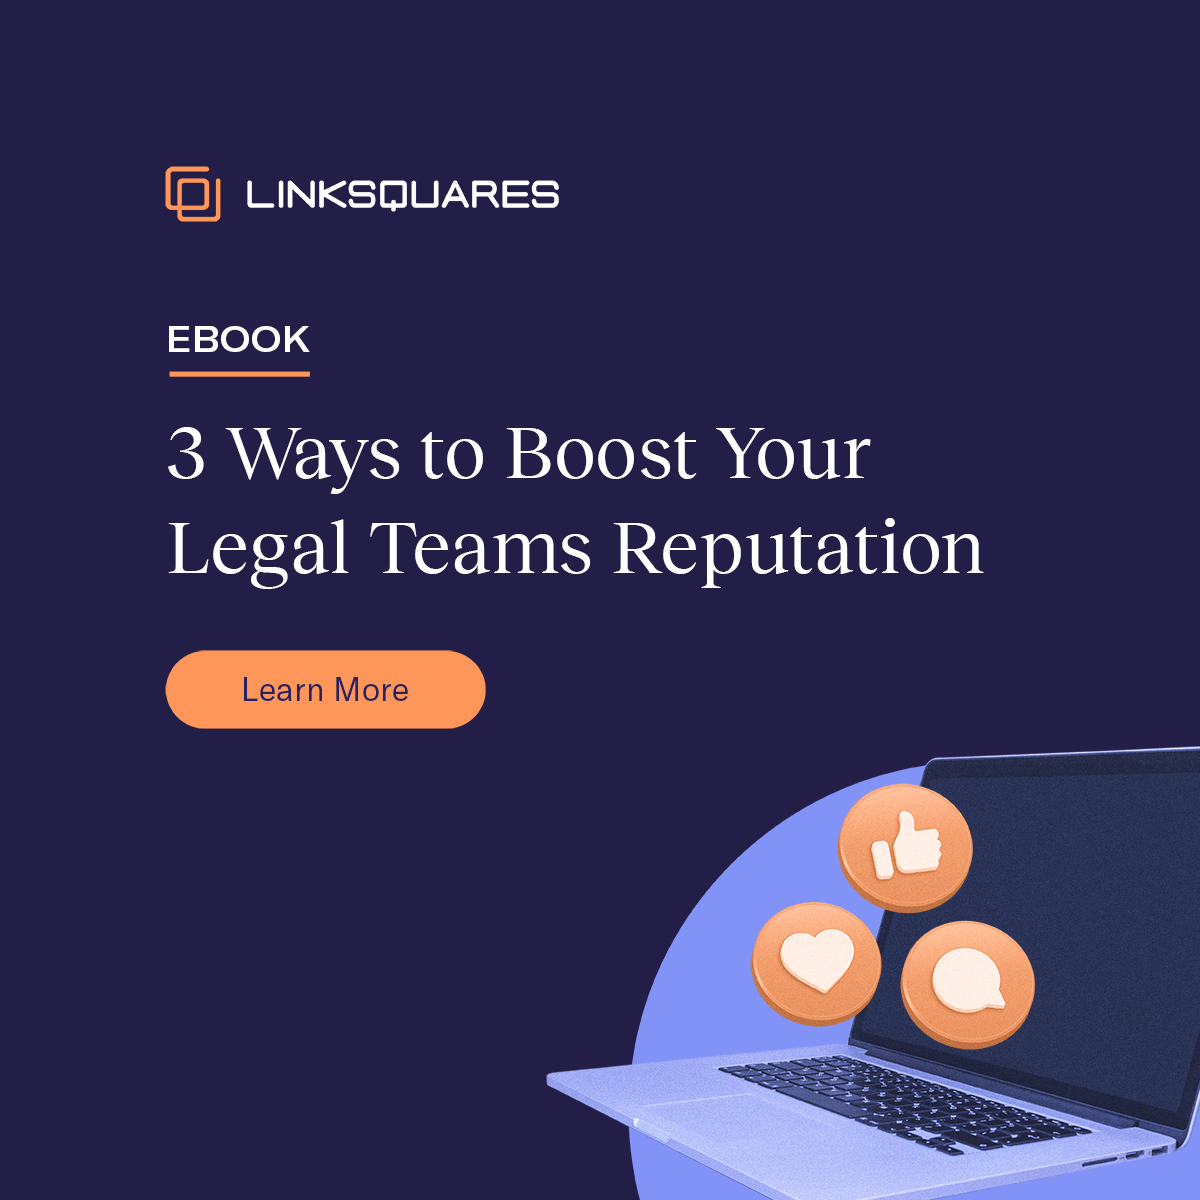 3 Ways to Boost Your Legal Team's Reputation